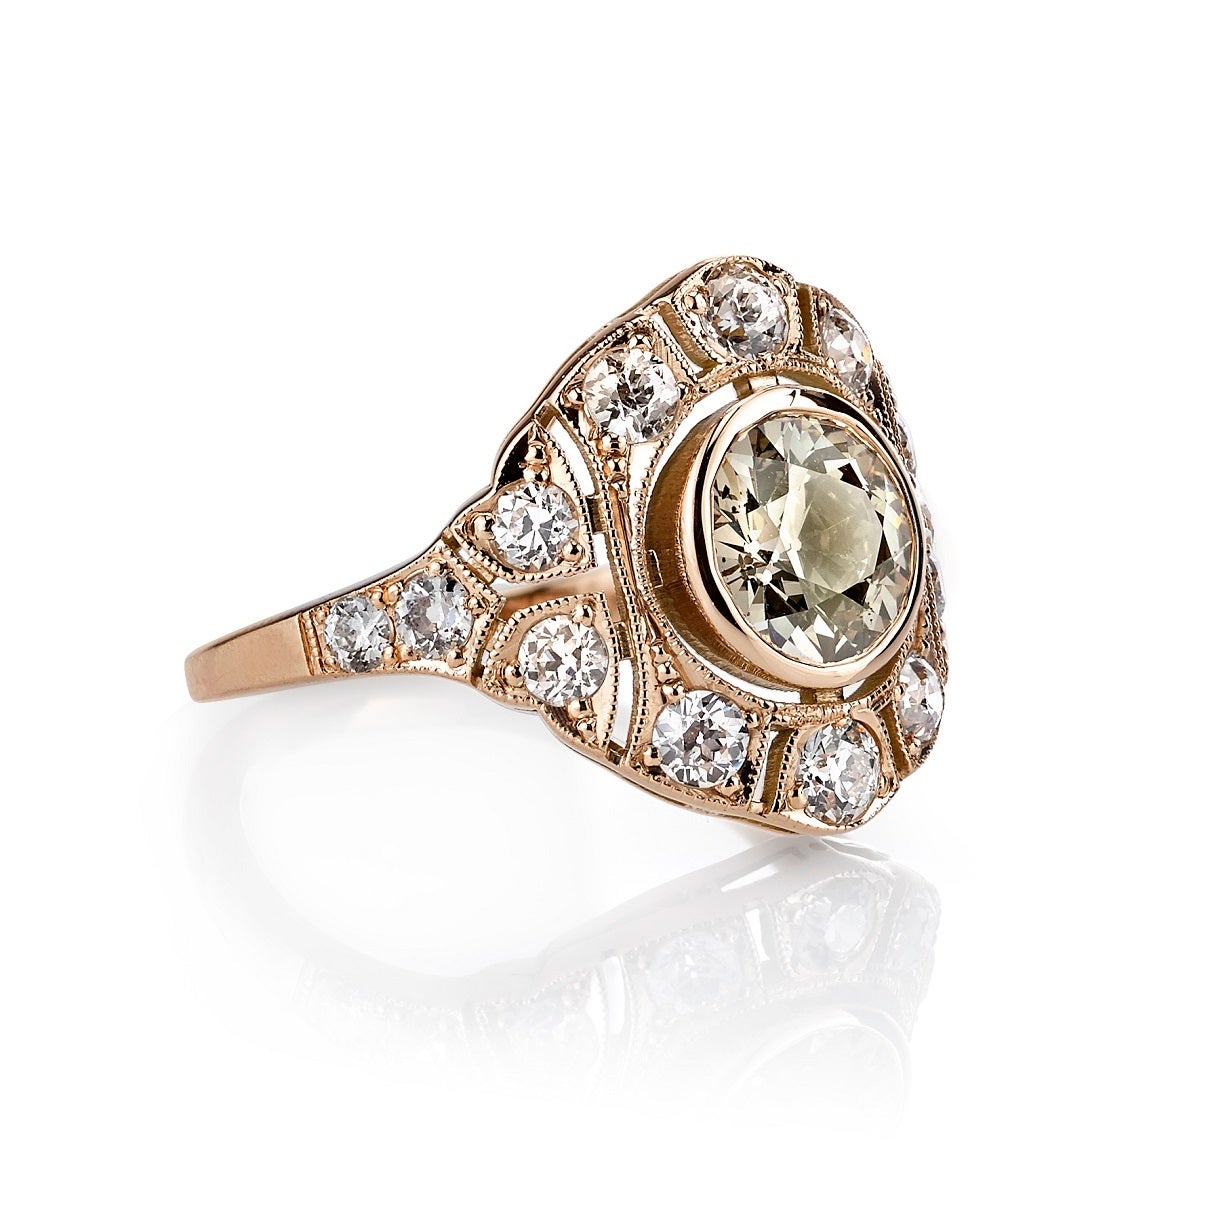 1.24ct Golden Brown/ SI2 old European cut diamond set in a handcrafted 18k rose gold mounting.